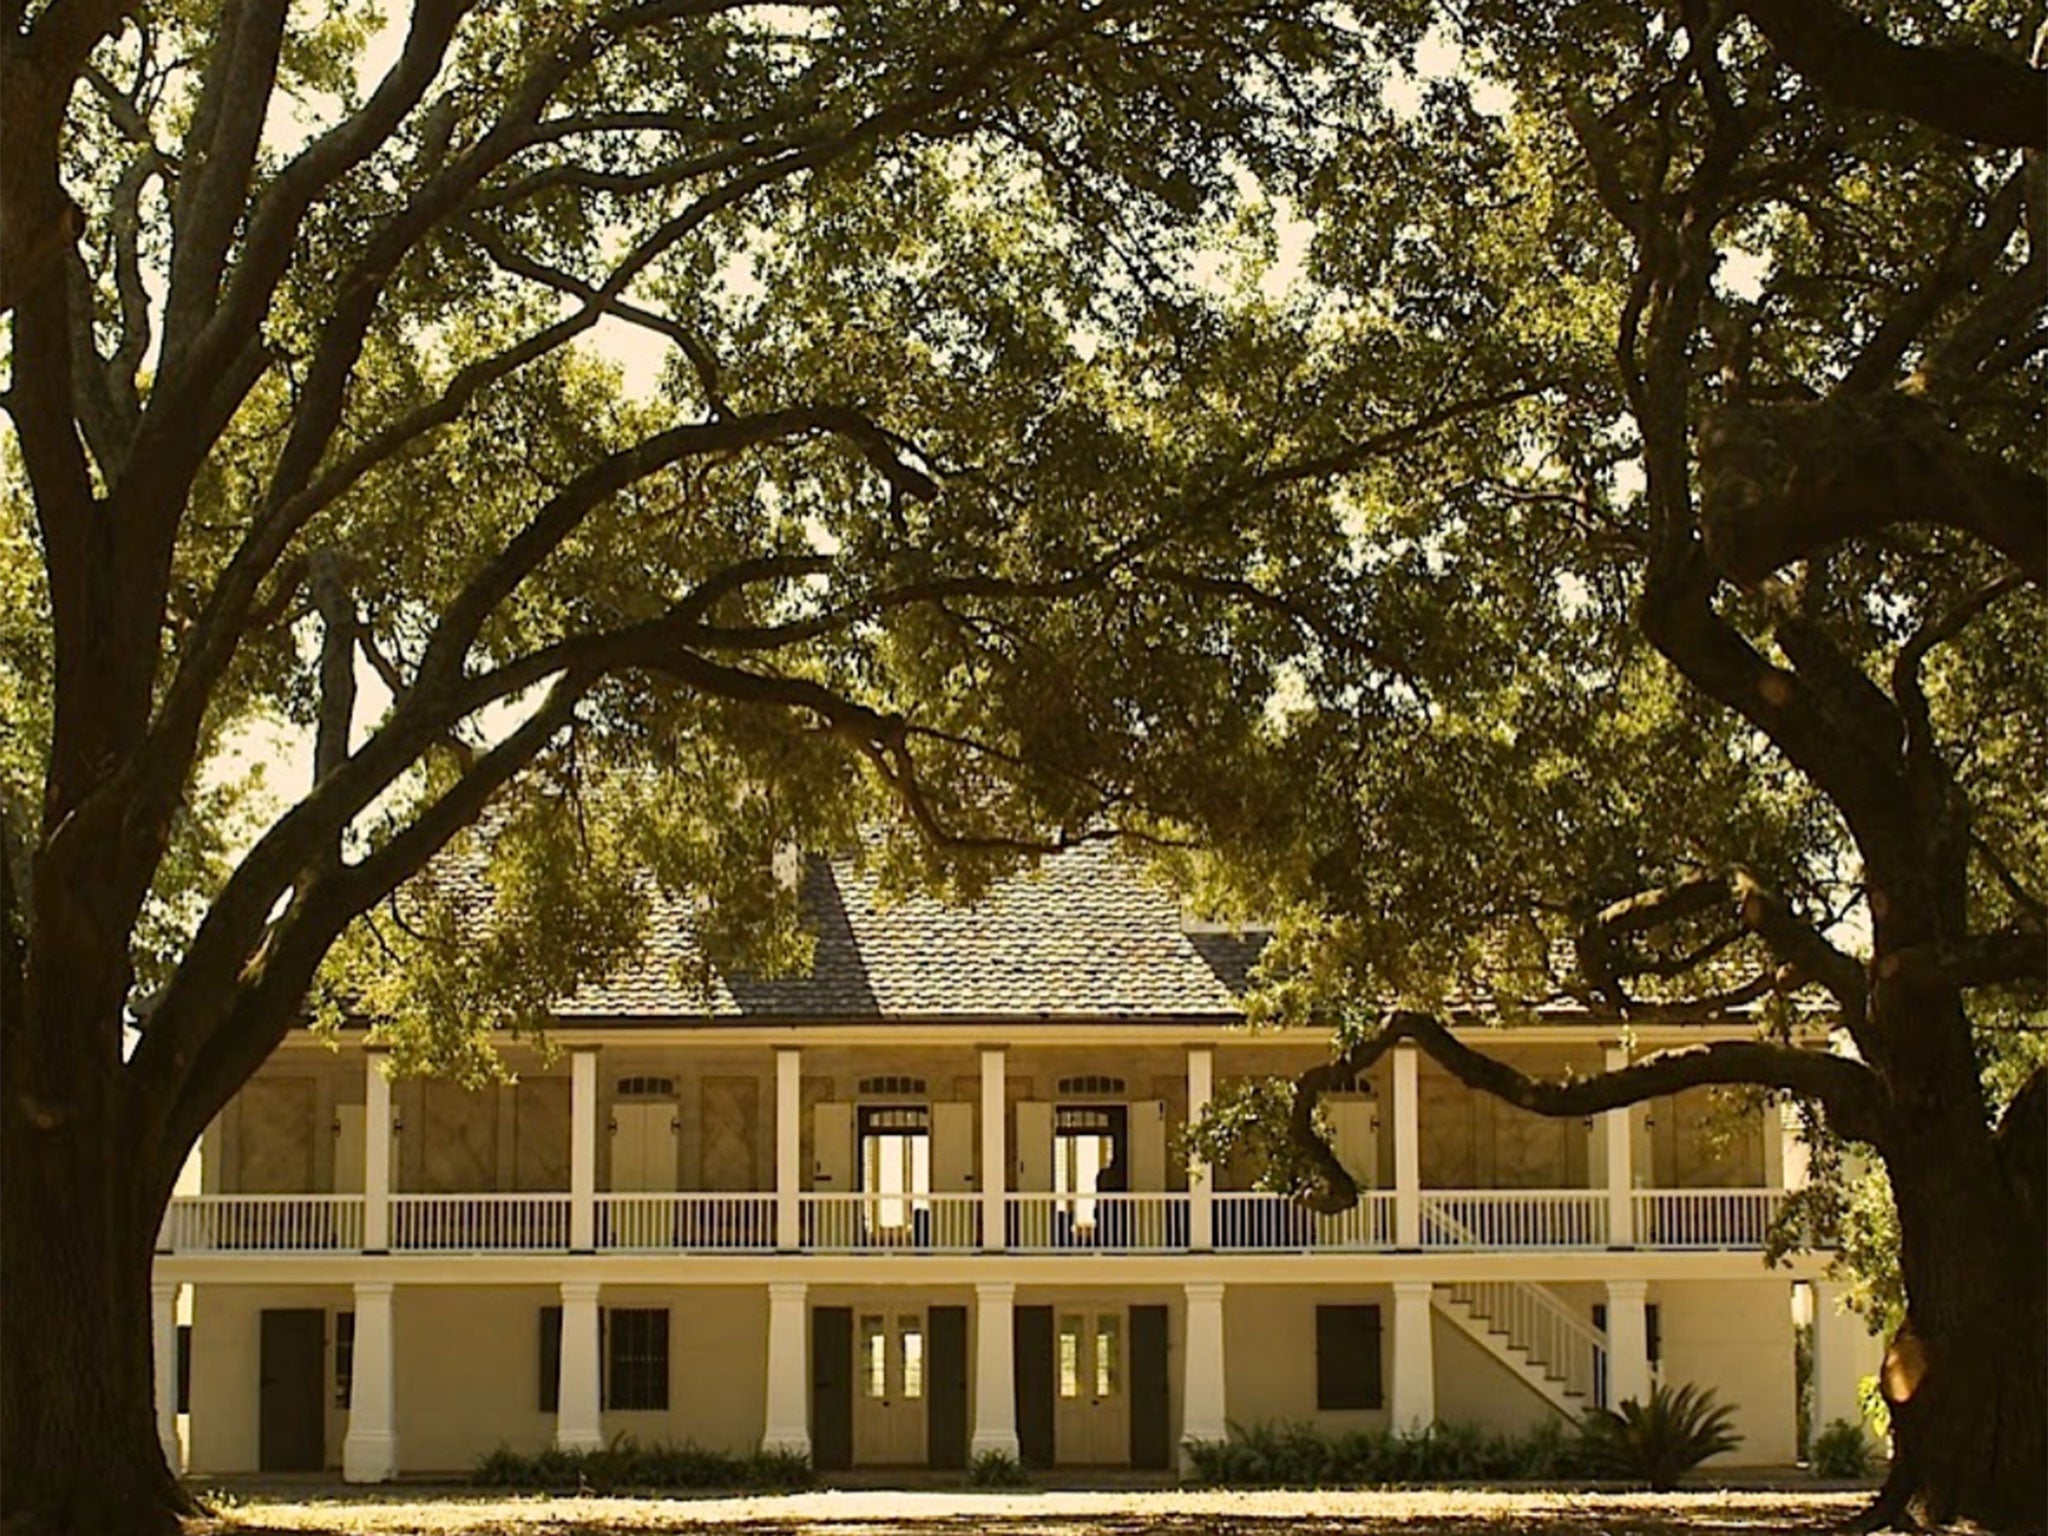 The museum has been established at the Whitney Plantation